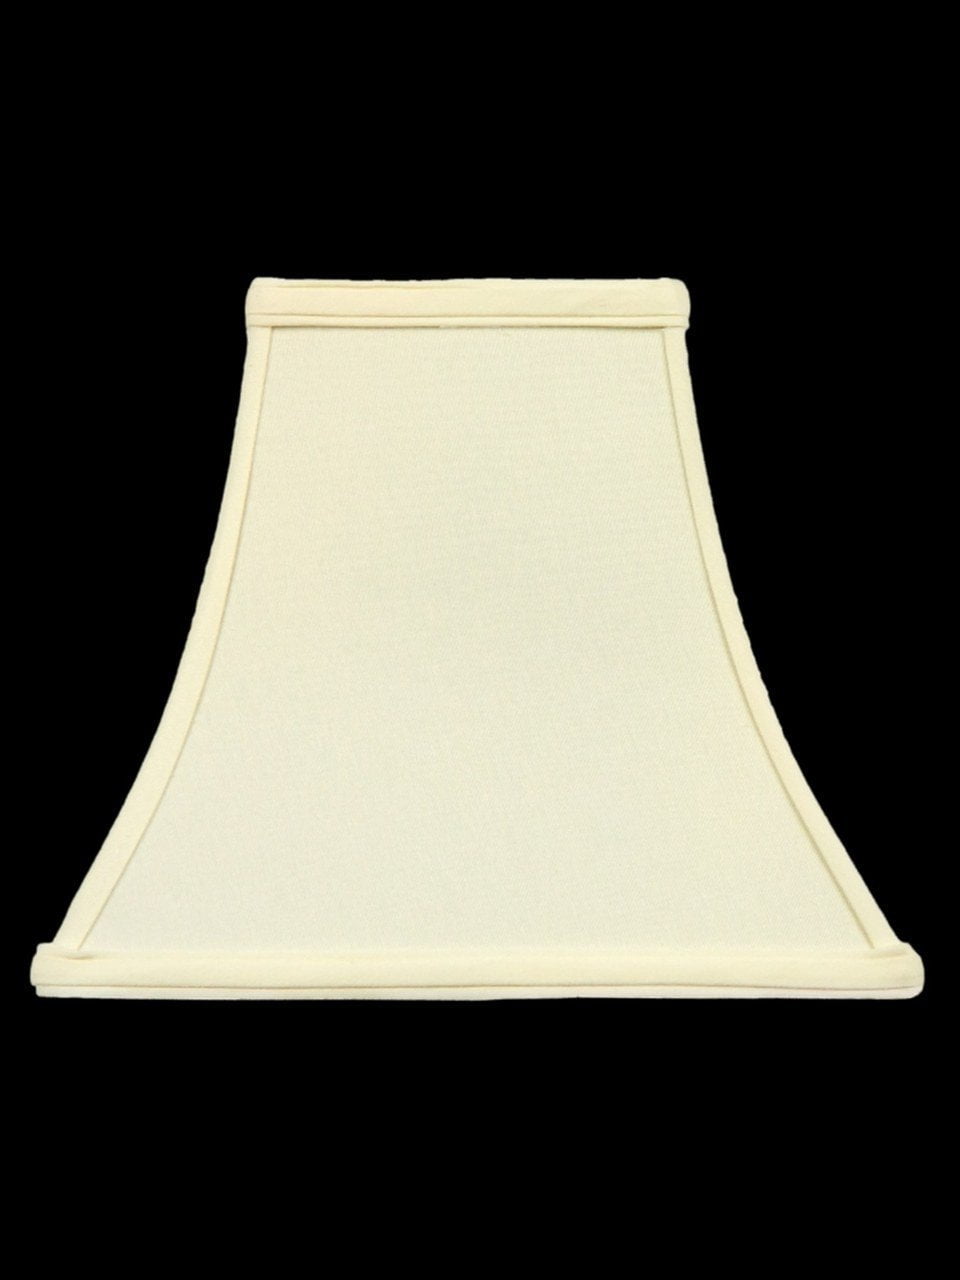 Square Bell 8 Inch Clip on Candle Stick Replacement Lamp Shade Eggshell